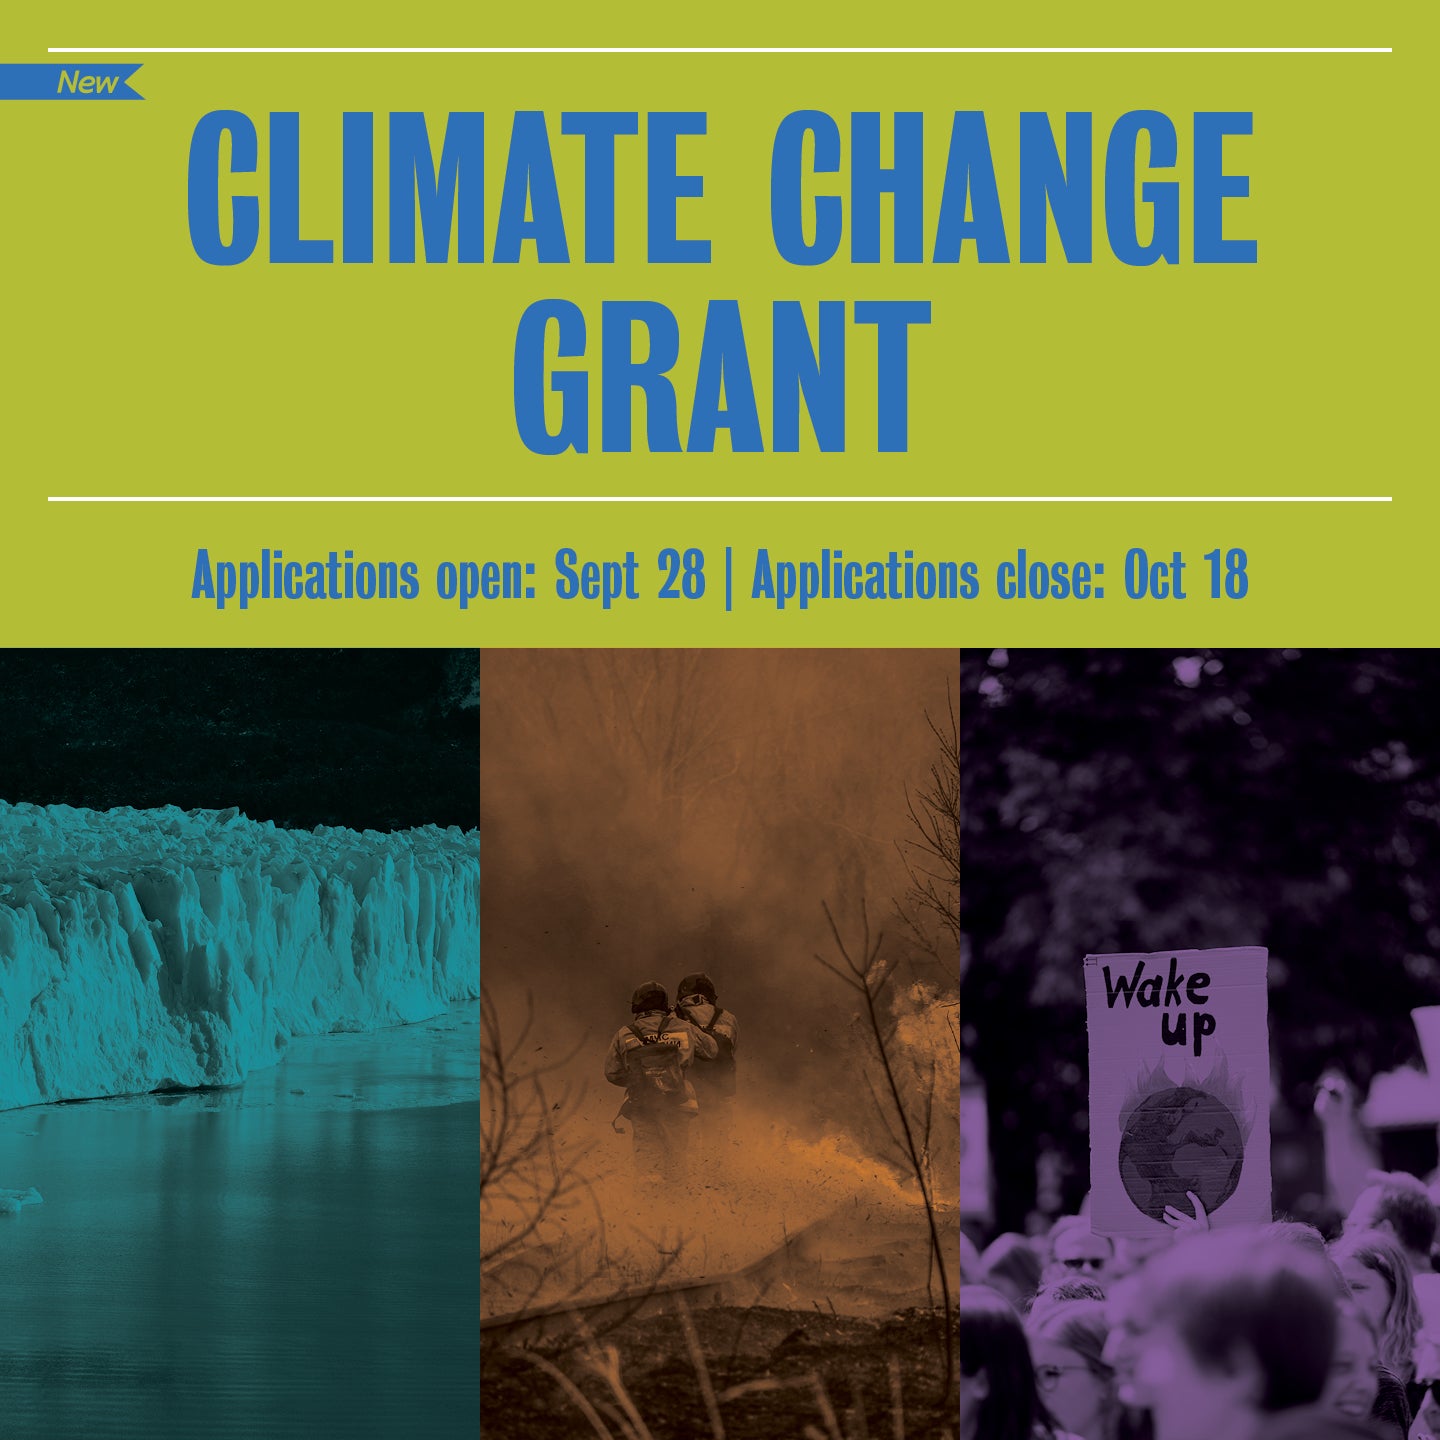 Climate Change Grant poster